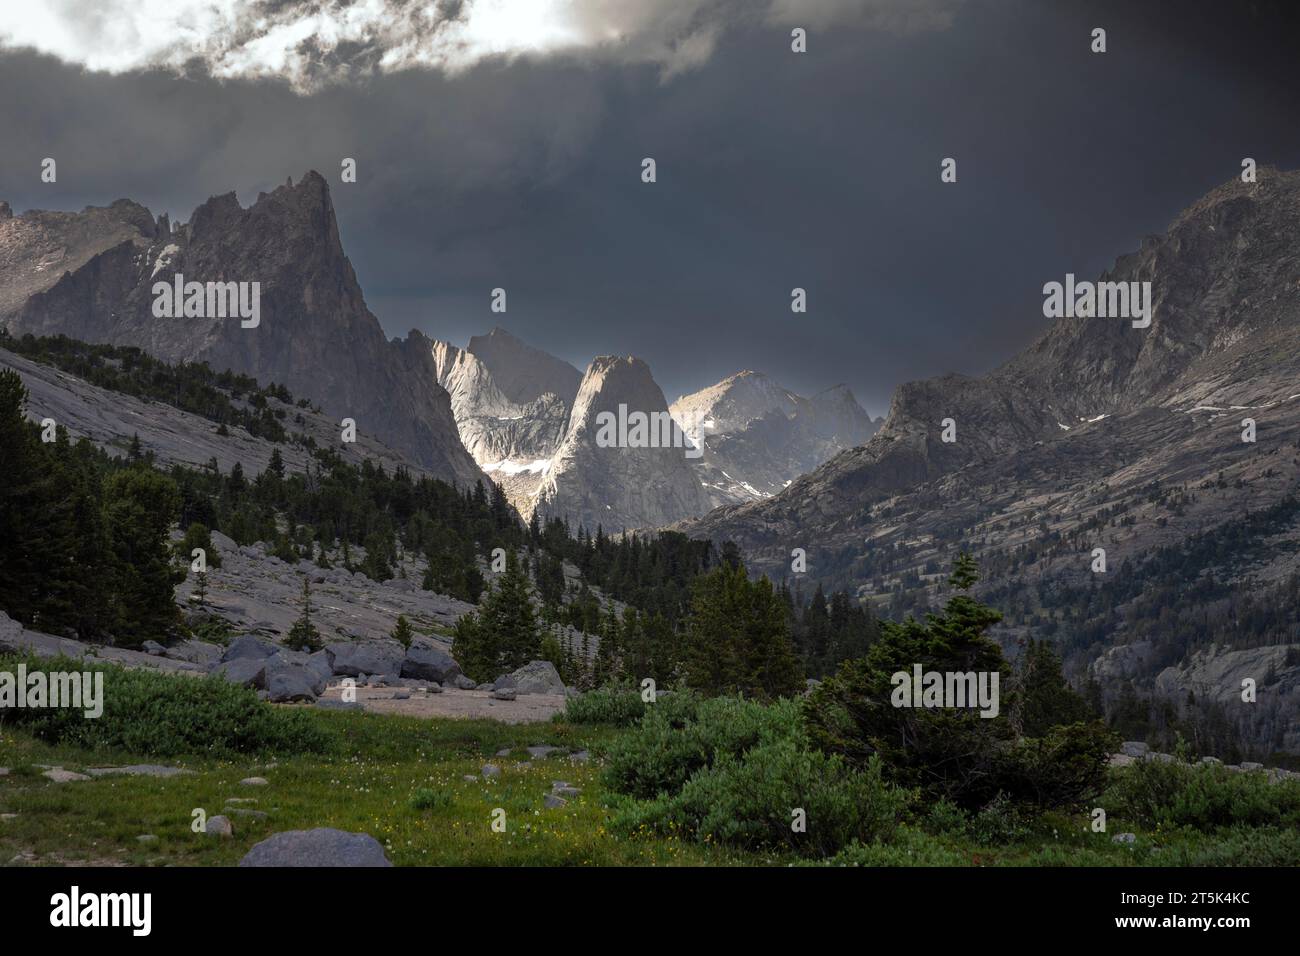 WY05636-05...WYOMING - Storm coming over Sundance Pinnacle towards Deep Lake in the Bridger Wilderness of the Wind River Range. Stock Photo